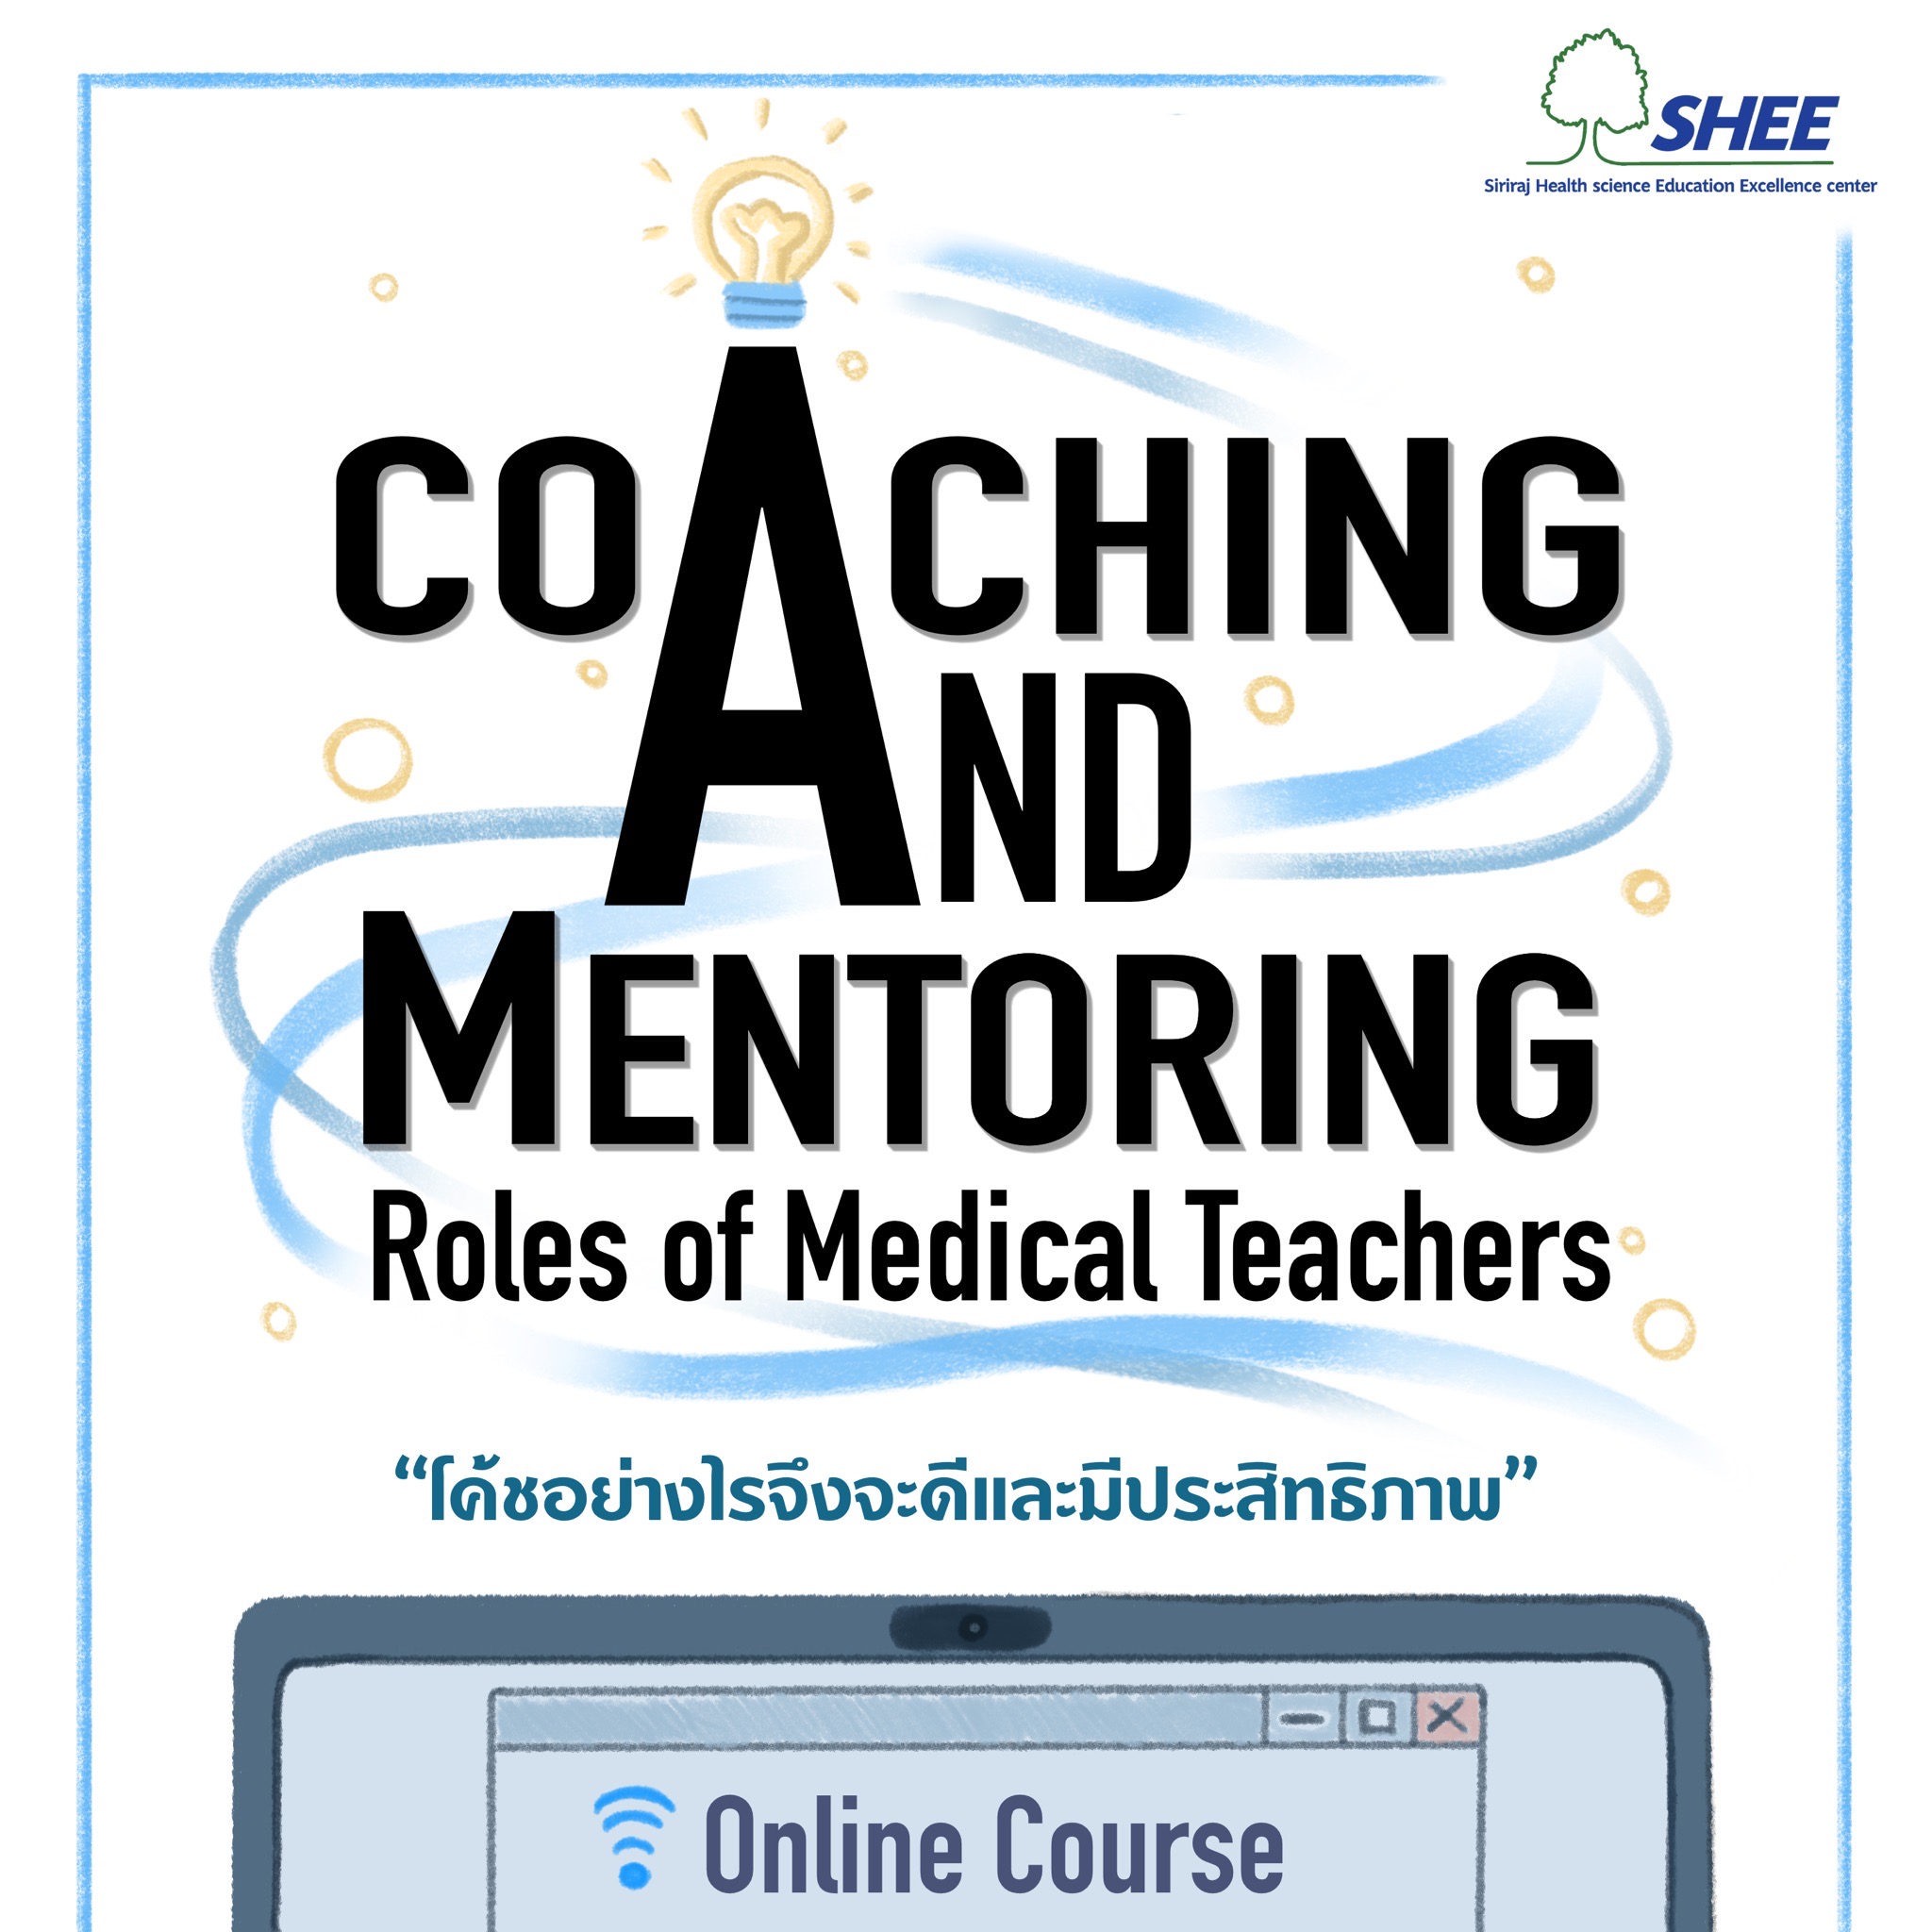 Coaching and mentoring roles of medical teachers (14 ชม.)